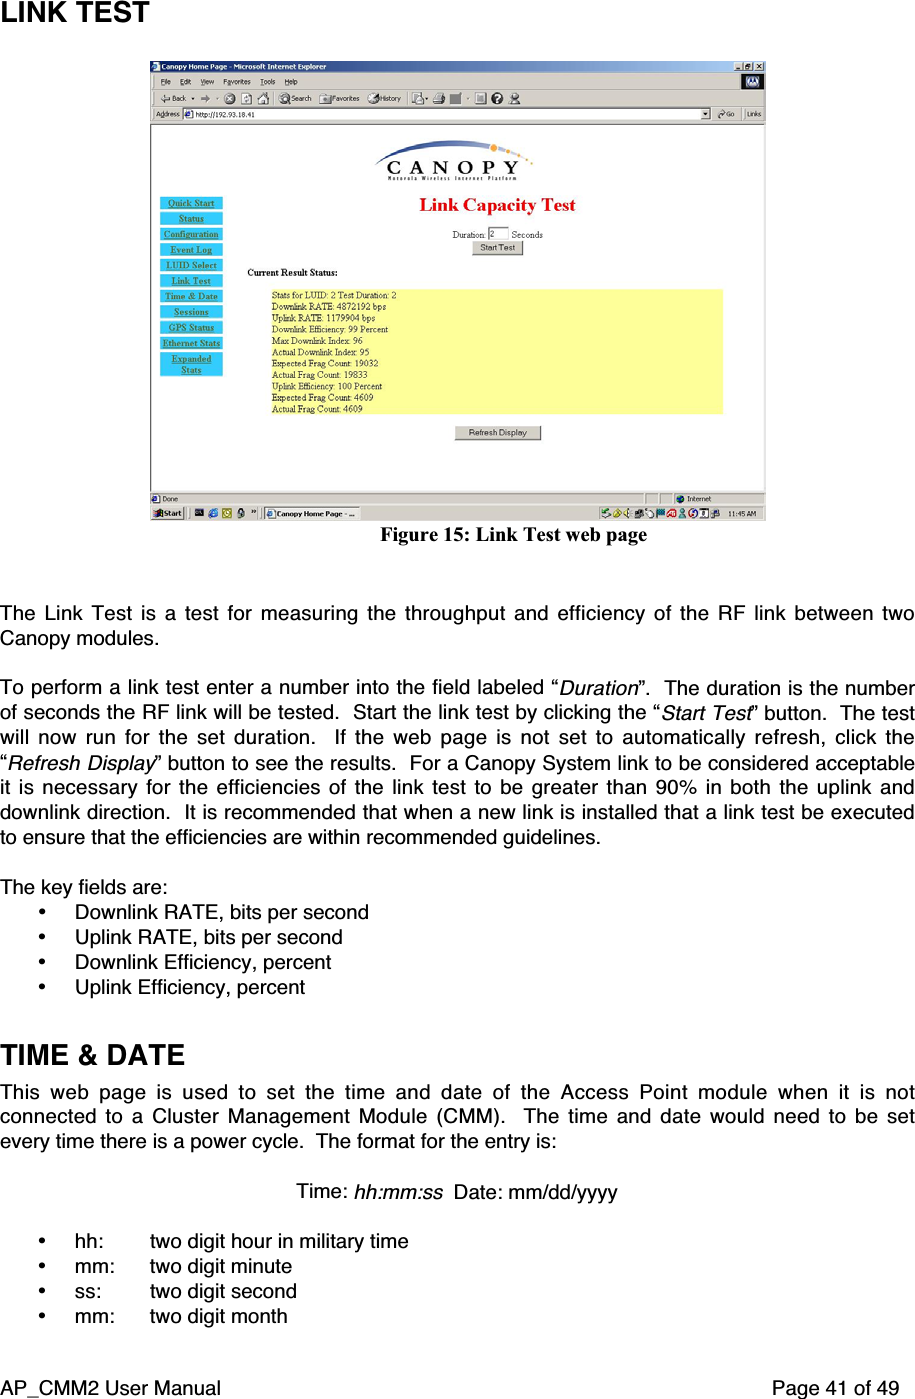 AP_CMM2 User Manual Page 41 of 49LINK TESTFigure 15: Link Test web pageThe Link Test is a test for measuring the throughput and efficiency of the RF link between twoCanopy modules.To perform a link test enter a number into the field labeled “Duration”.  The duration is the numberof seconds the RF link will be tested.  Start the link test by clicking the “Start Test” button.  The testwill now run for the set duration.   If the web page is not set to automatically refresh, click the“Refresh Display” button to see the results.  For a Canopy System link to be considered acceptableit is necessary for the efficiencies of the link test to be greater than 90% in both the uplink anddownlink direction.  It is recommended that when a new link is installed that a link test be executedto ensure that the efficiencies are within recommended guidelines.The key fields are:• Downlink RATE, bits per second• Uplink RATE, bits per second• Downlink Efficiency, percent• Uplink Efficiency, percentTIME &amp; DATEThis web page is used to set the time and date of the Access Point module when it is notconnected to a Cluster Management Module (CMM).   The time and date would need to be setevery time there is a power cycle.  The format for the entry is:Time: hh:mm:ss  Date: mm/dd/yyyy• hh:  two digit hour in military time• mm:  two digit minute• ss:  two digit second• mm:  two digit month